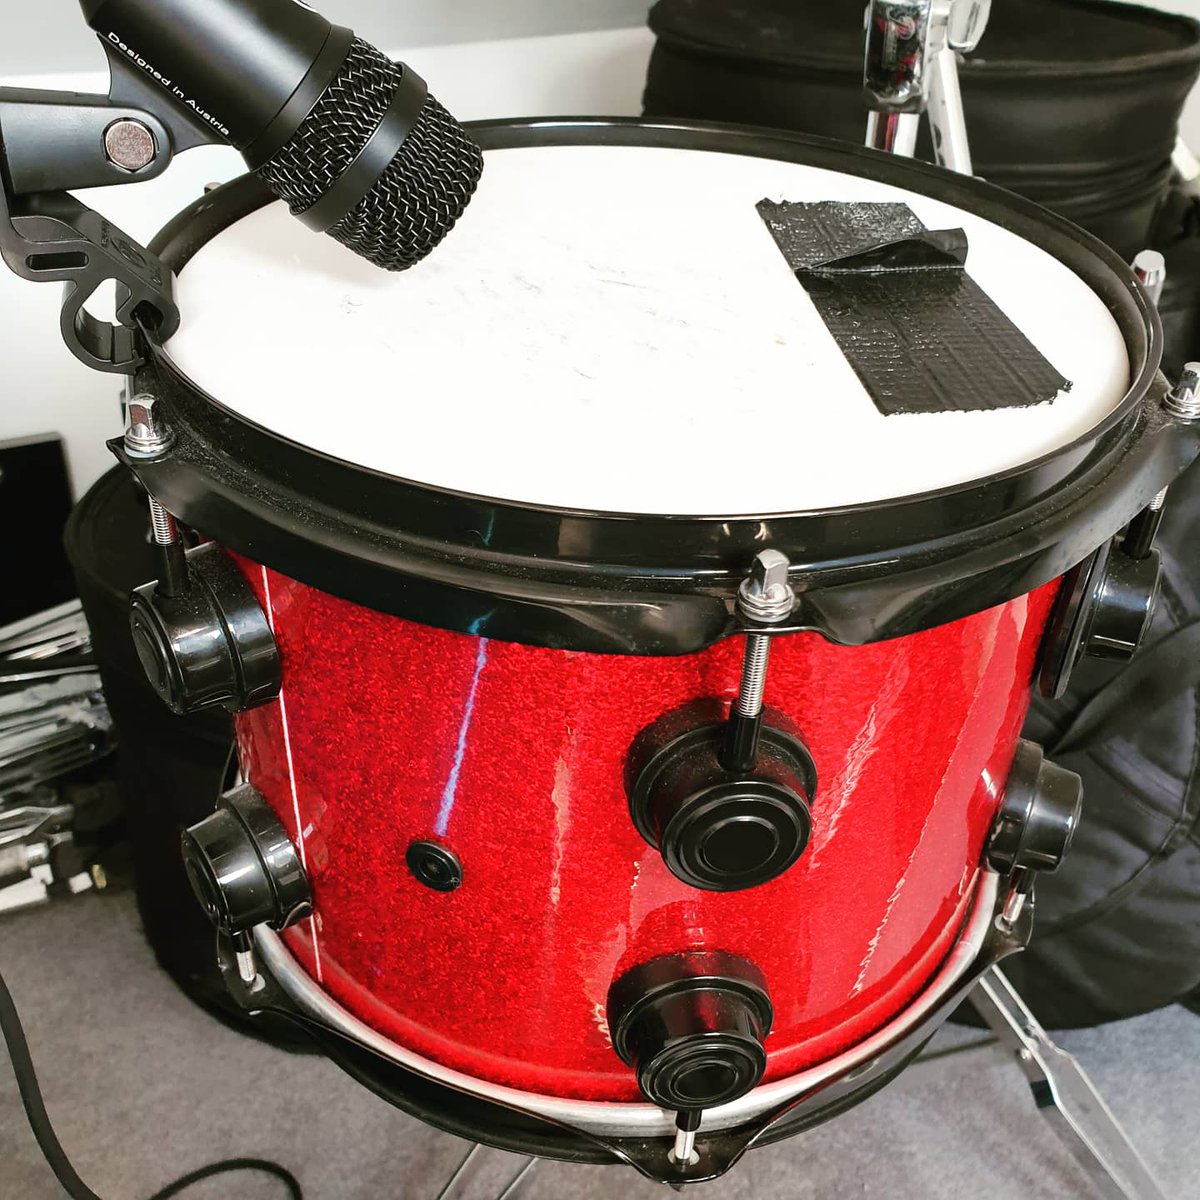 Absorbing weekend project - working on a new song that needs noisy drums, but of course with lockdown, I can't get to a rehearsal space to practise/record - I've got no space or soundproofing to play at home. I do have my own drums and cymbals though, so I've been taking...